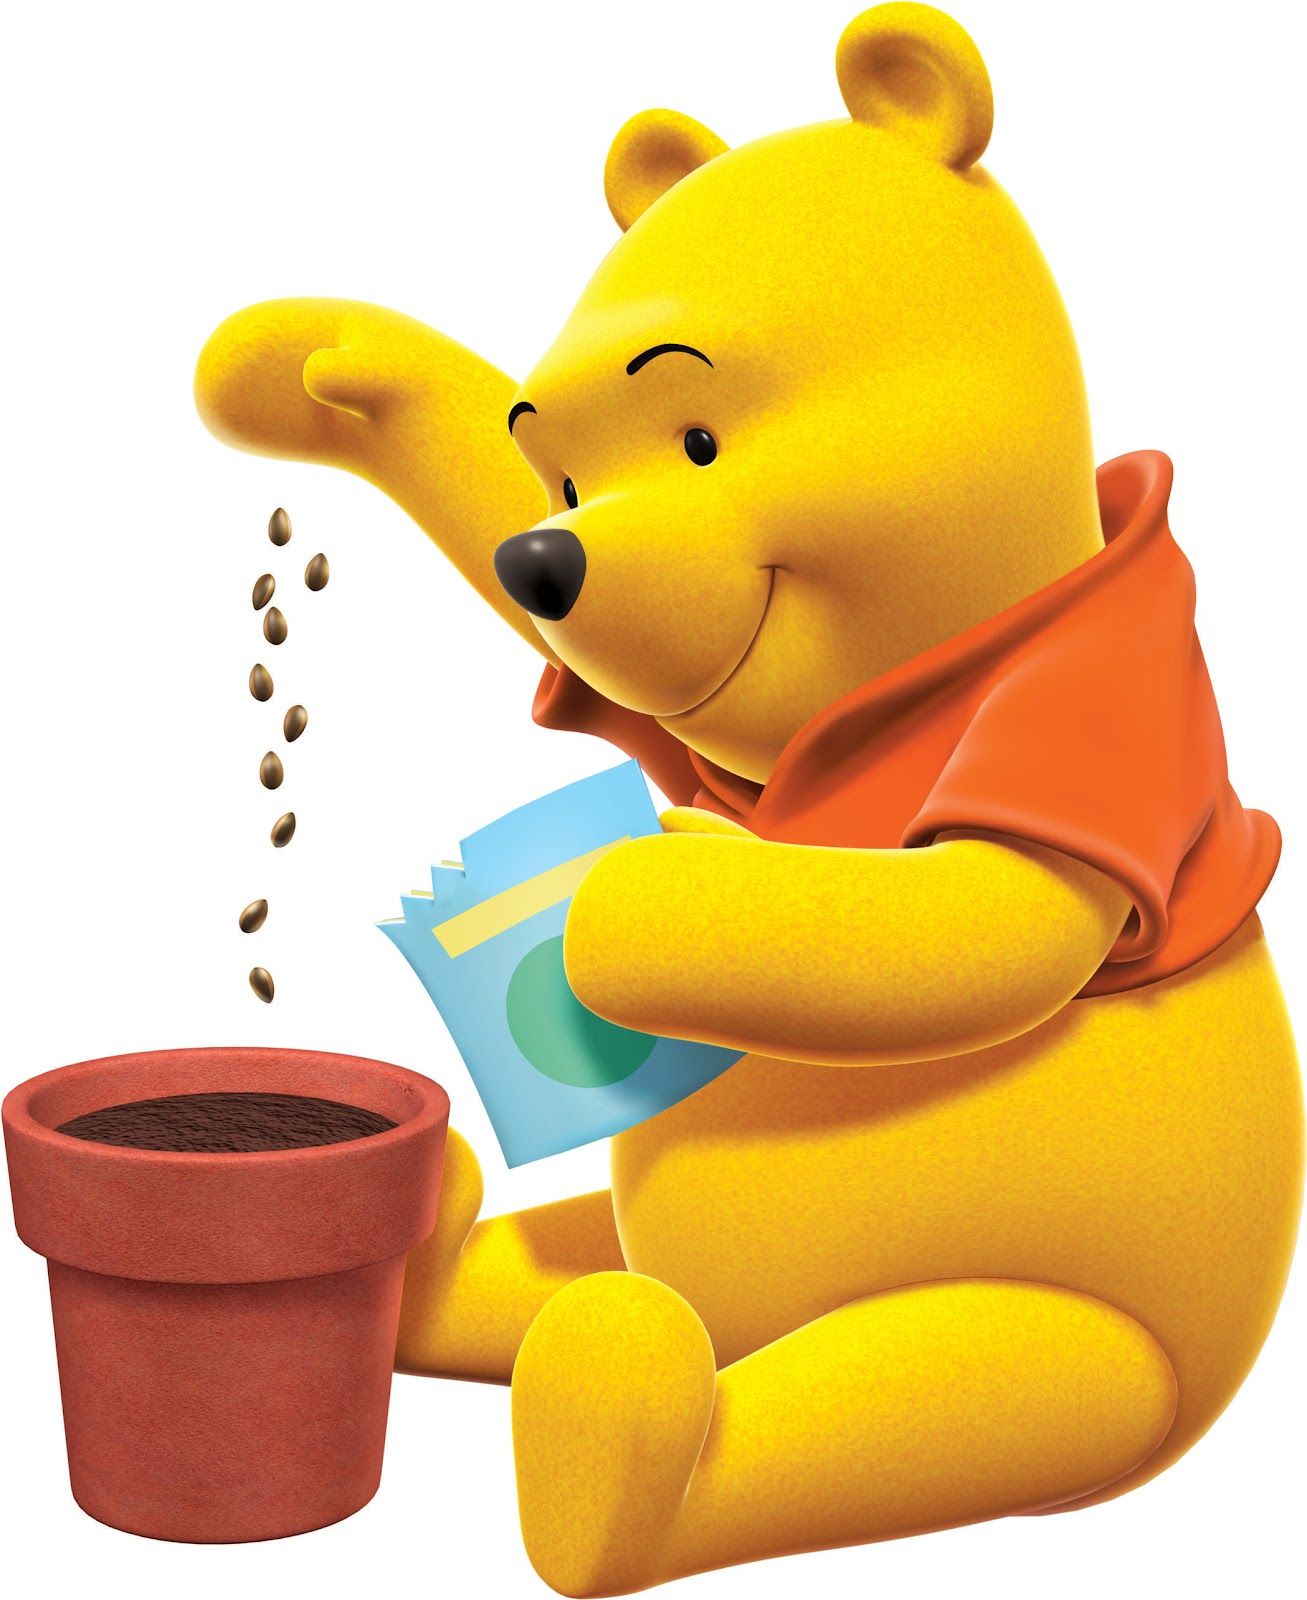 Disney Winnie the Pooh HD Wallpaper for iPhone 6 - Cartoons Wallpapers